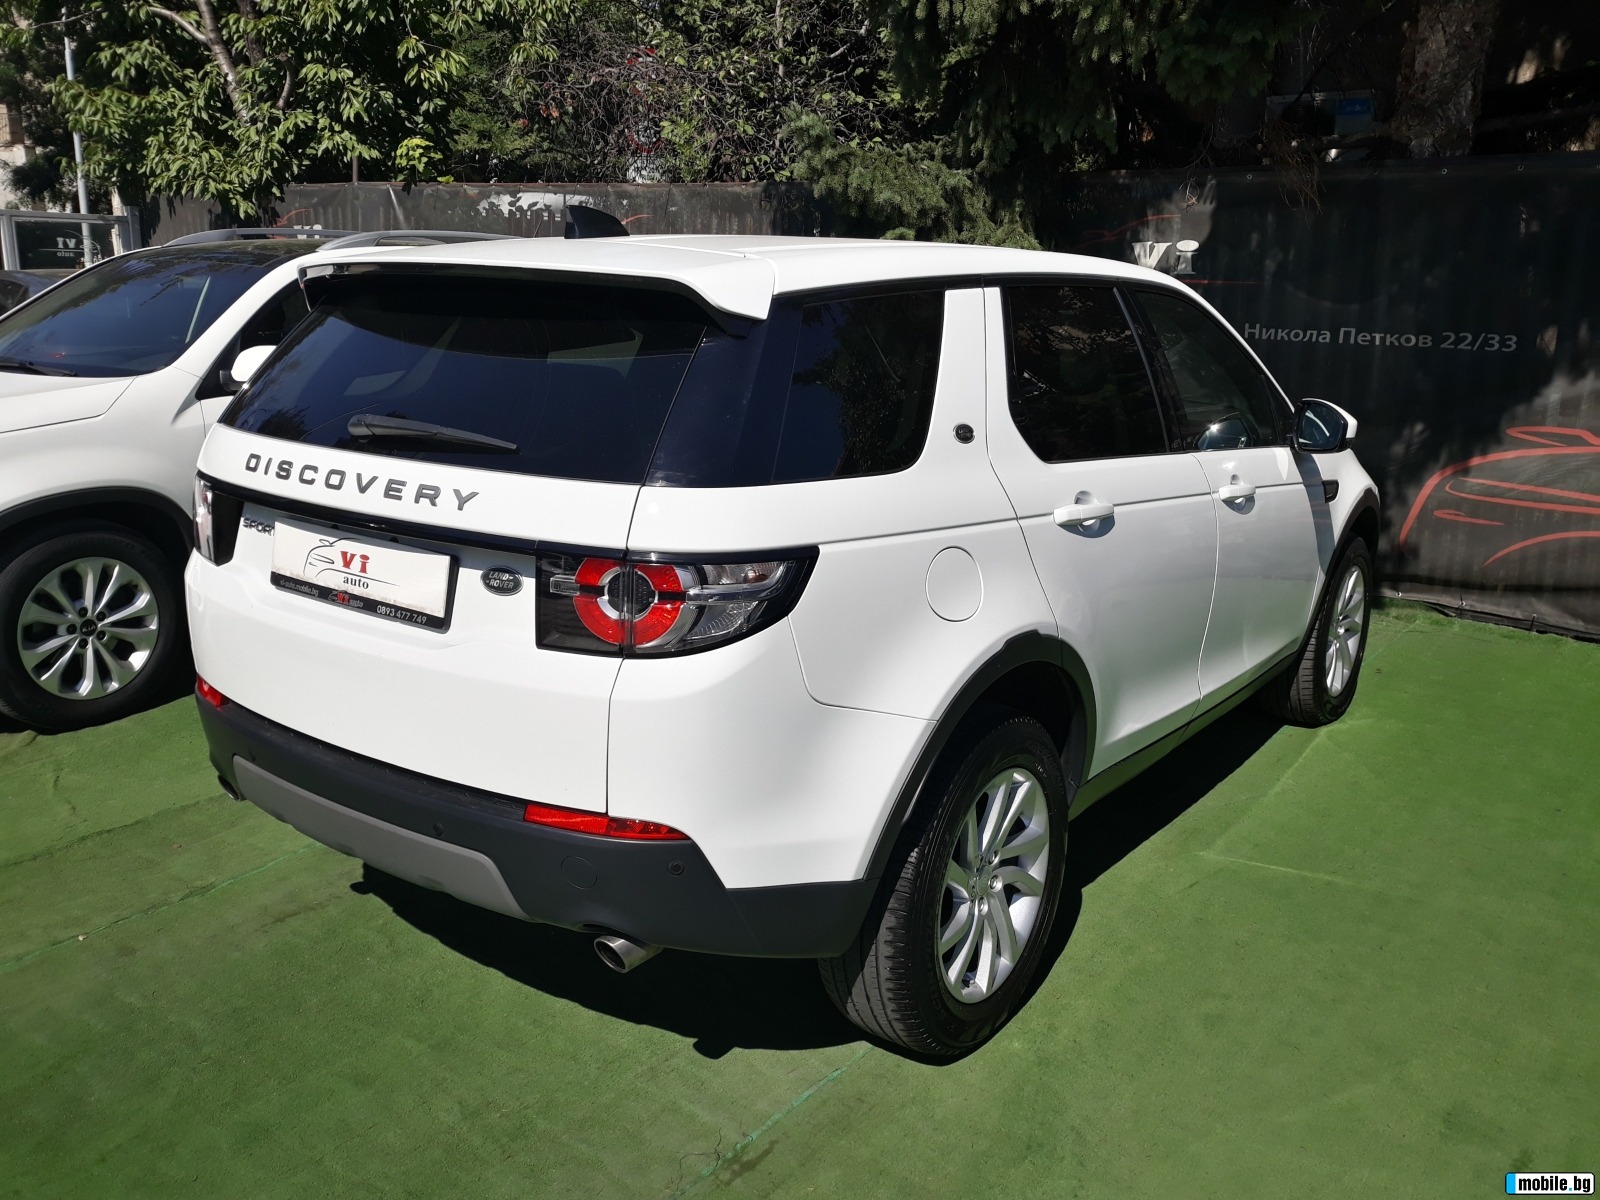 Land Rover Discovery SPORT/4x4 | Mobile.bg   4